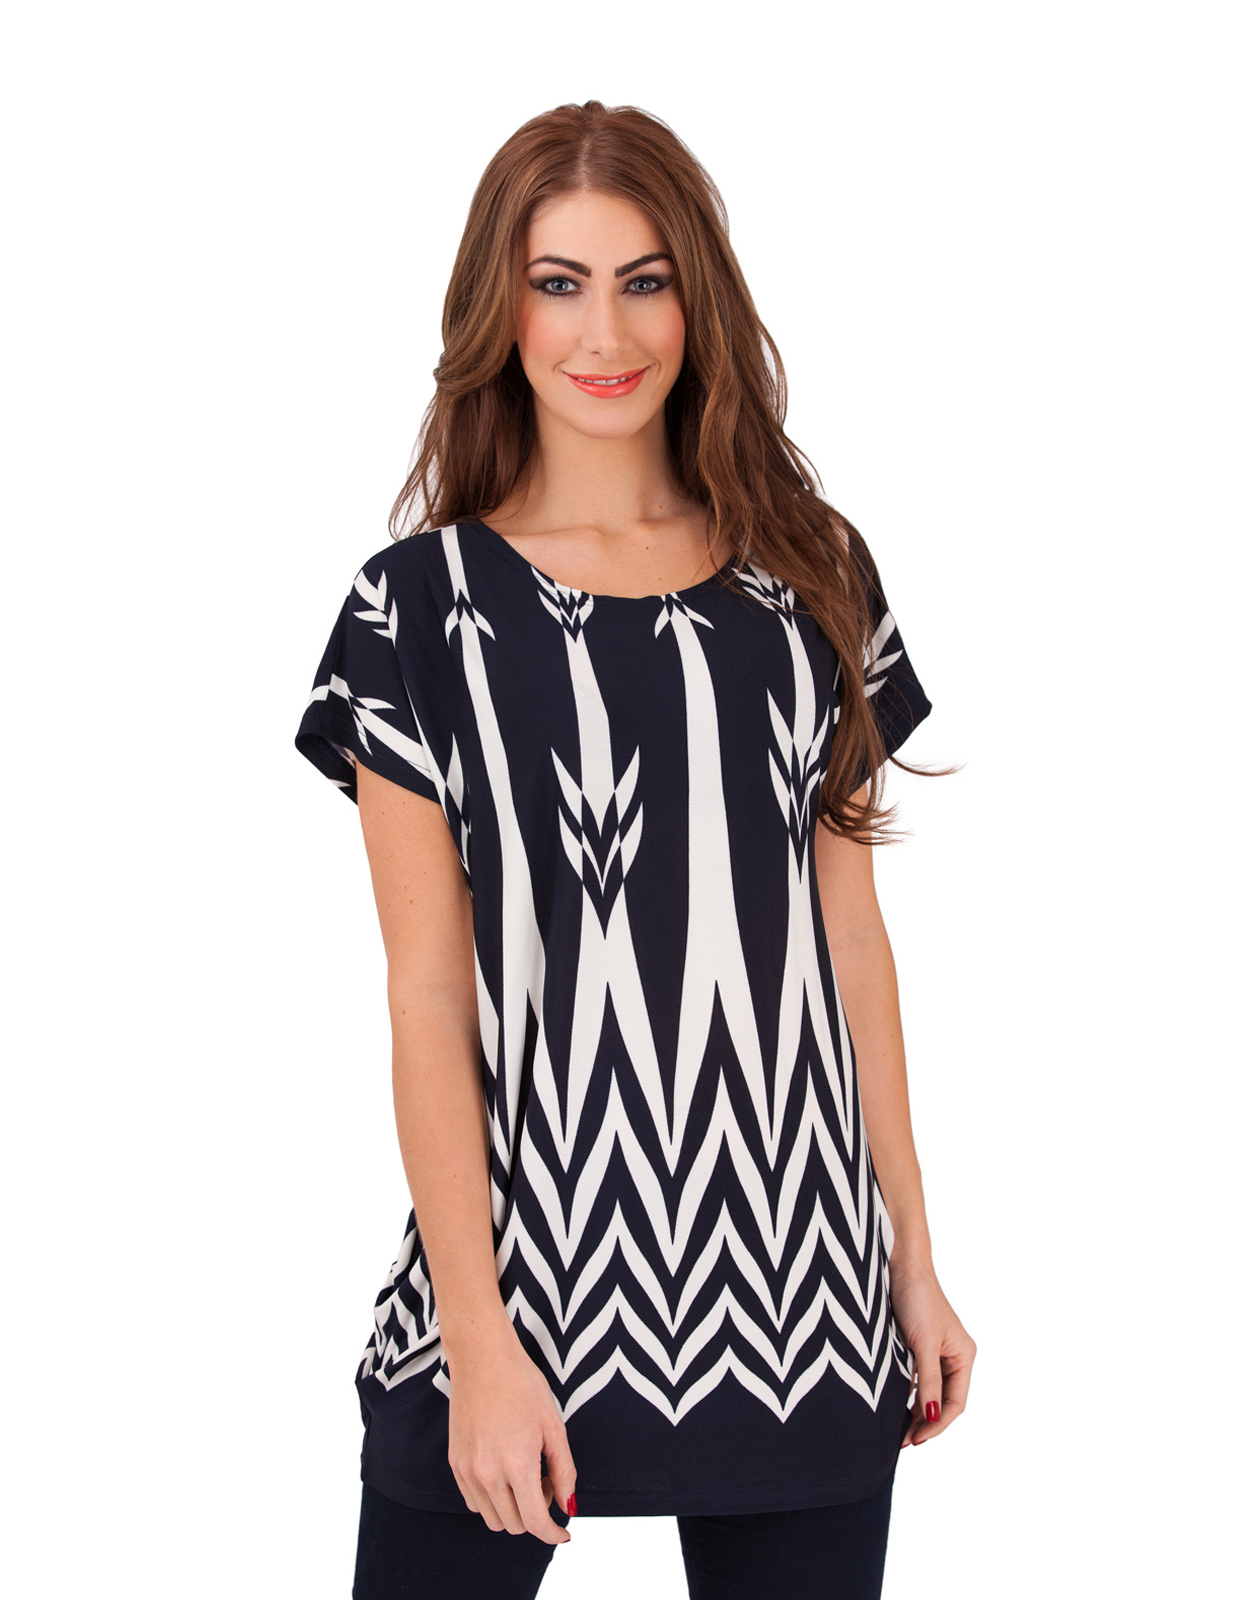 Boutique Womens Tunic Dress Long Summer Casual Monochrome Top Clearance Sale | eBay